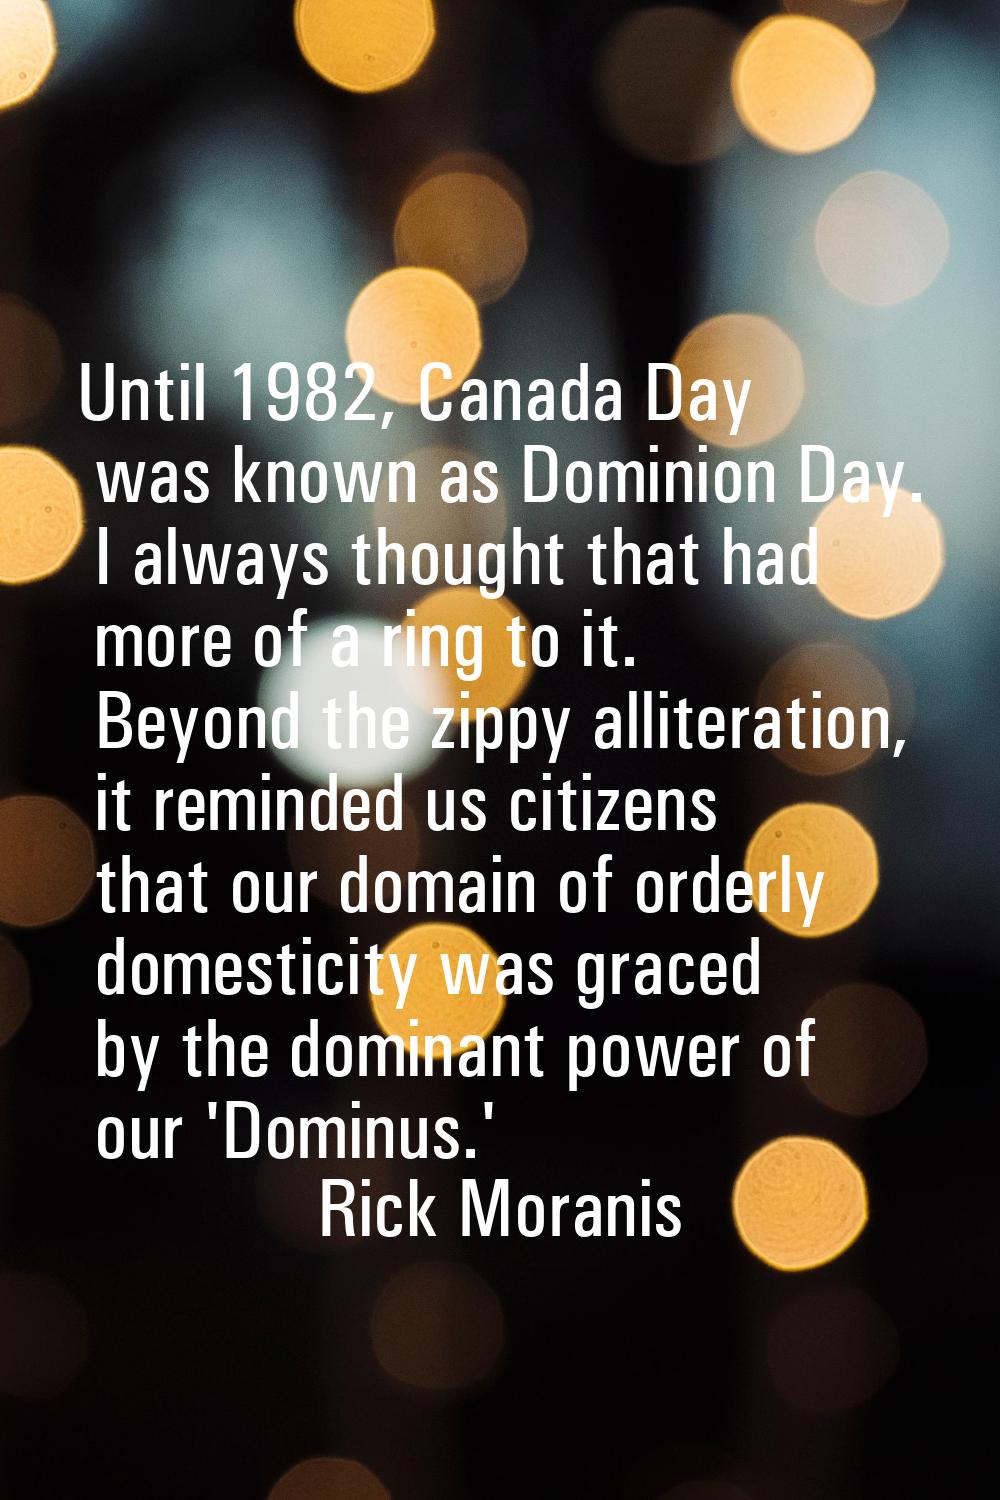 Until 1982, Canada Day was known as Dominion Day. I always thought that had more of a ring to it. B